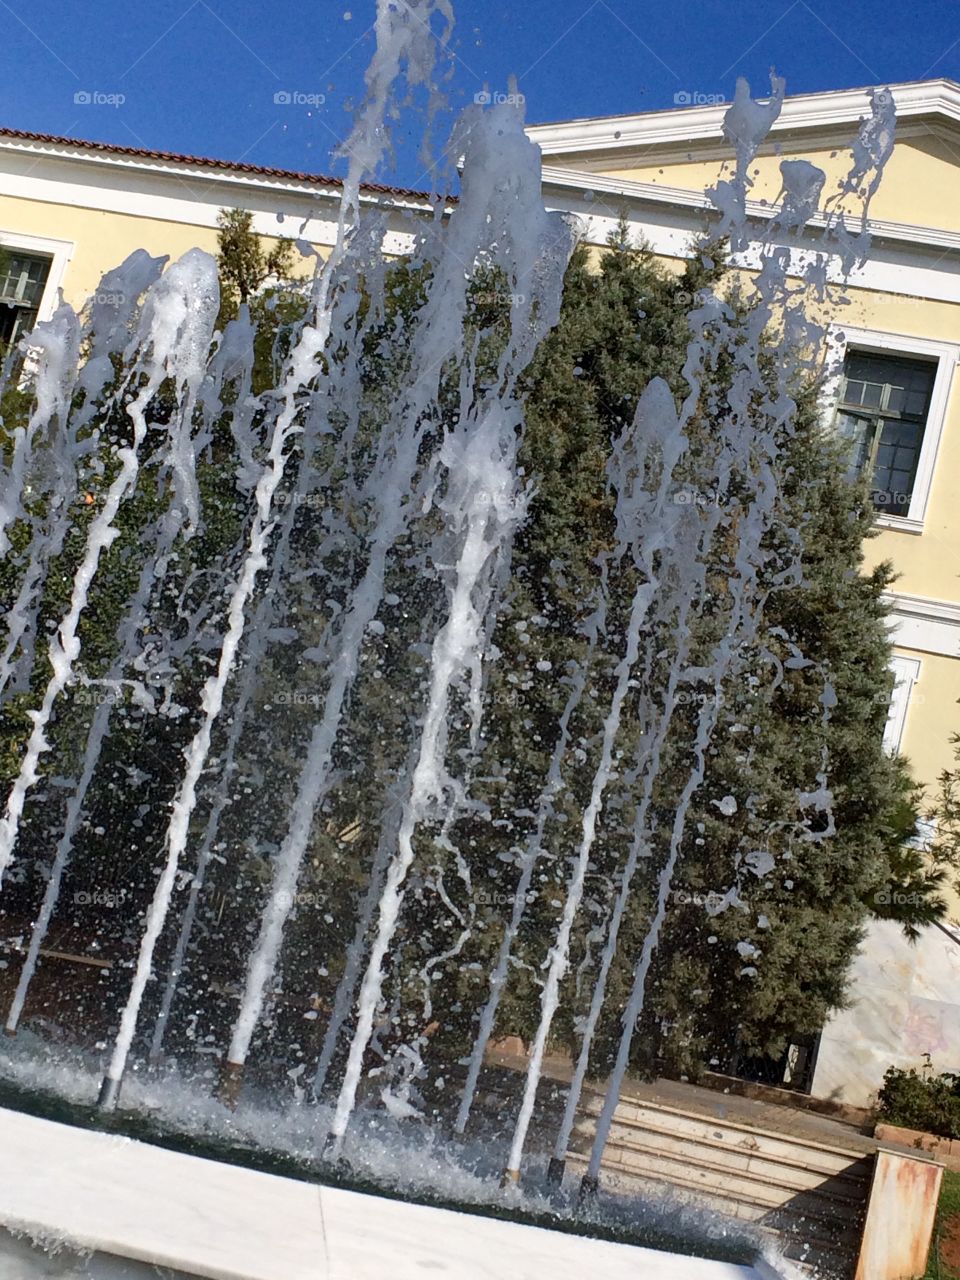 Sunny day in Athens! #fountain